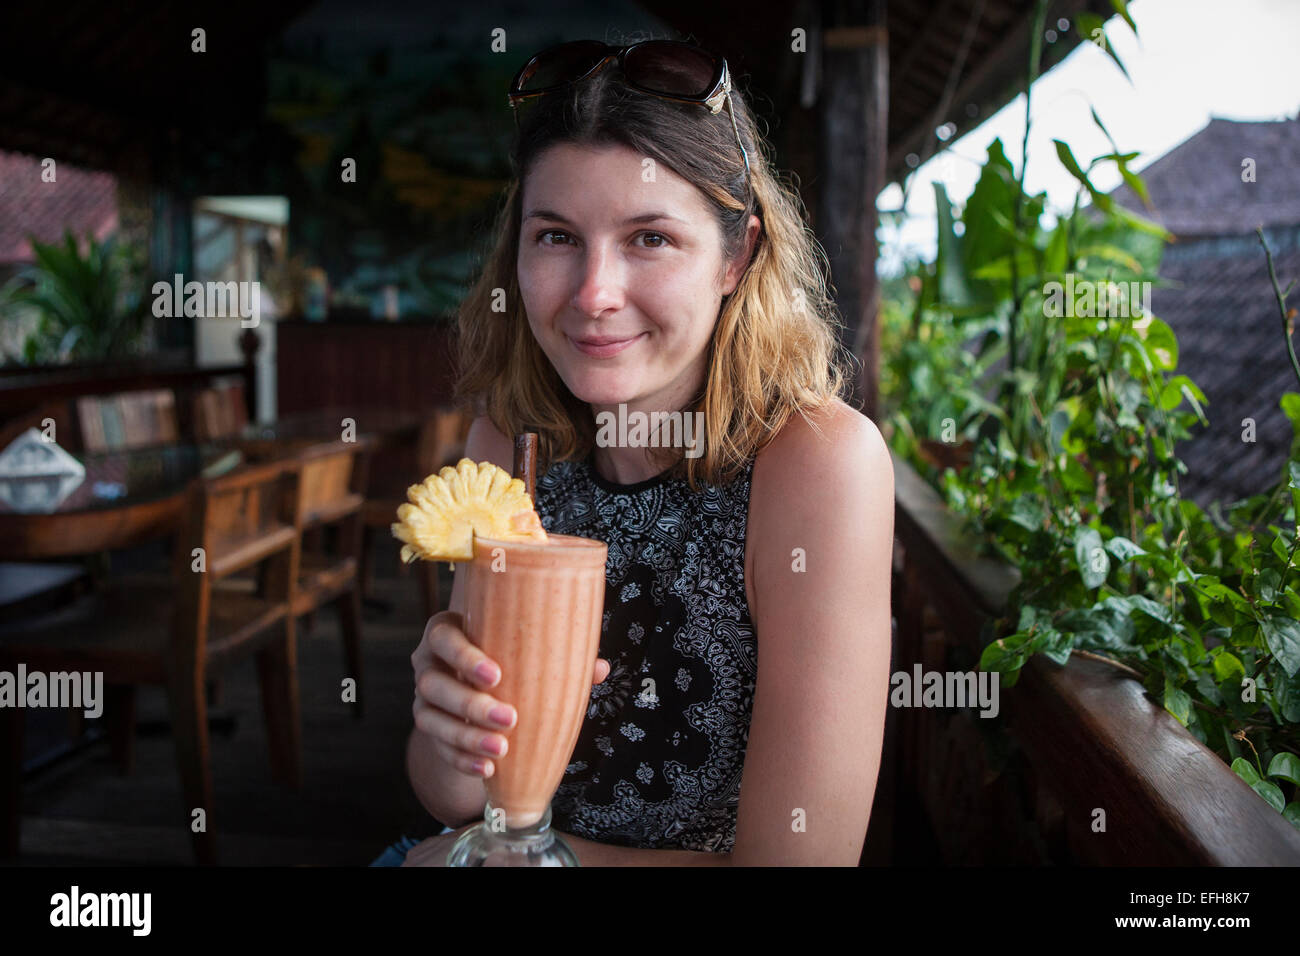 A woman drinking a fruit smoothie on holiday Stock Photo